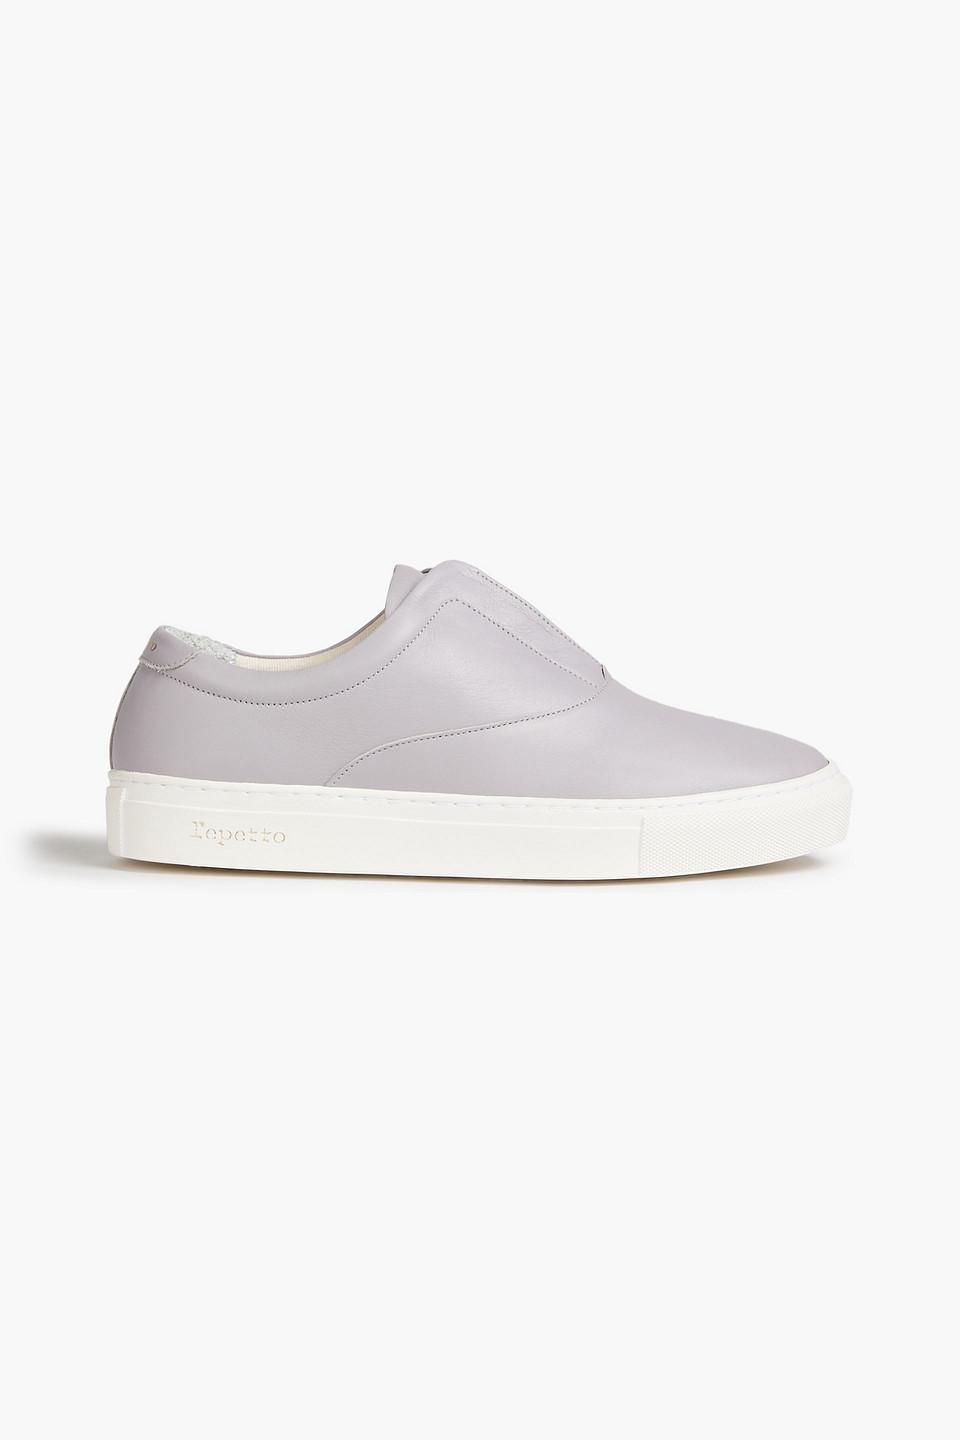 Repetto Fanny Leather Slip-on Sneakers in Purple | Lyst